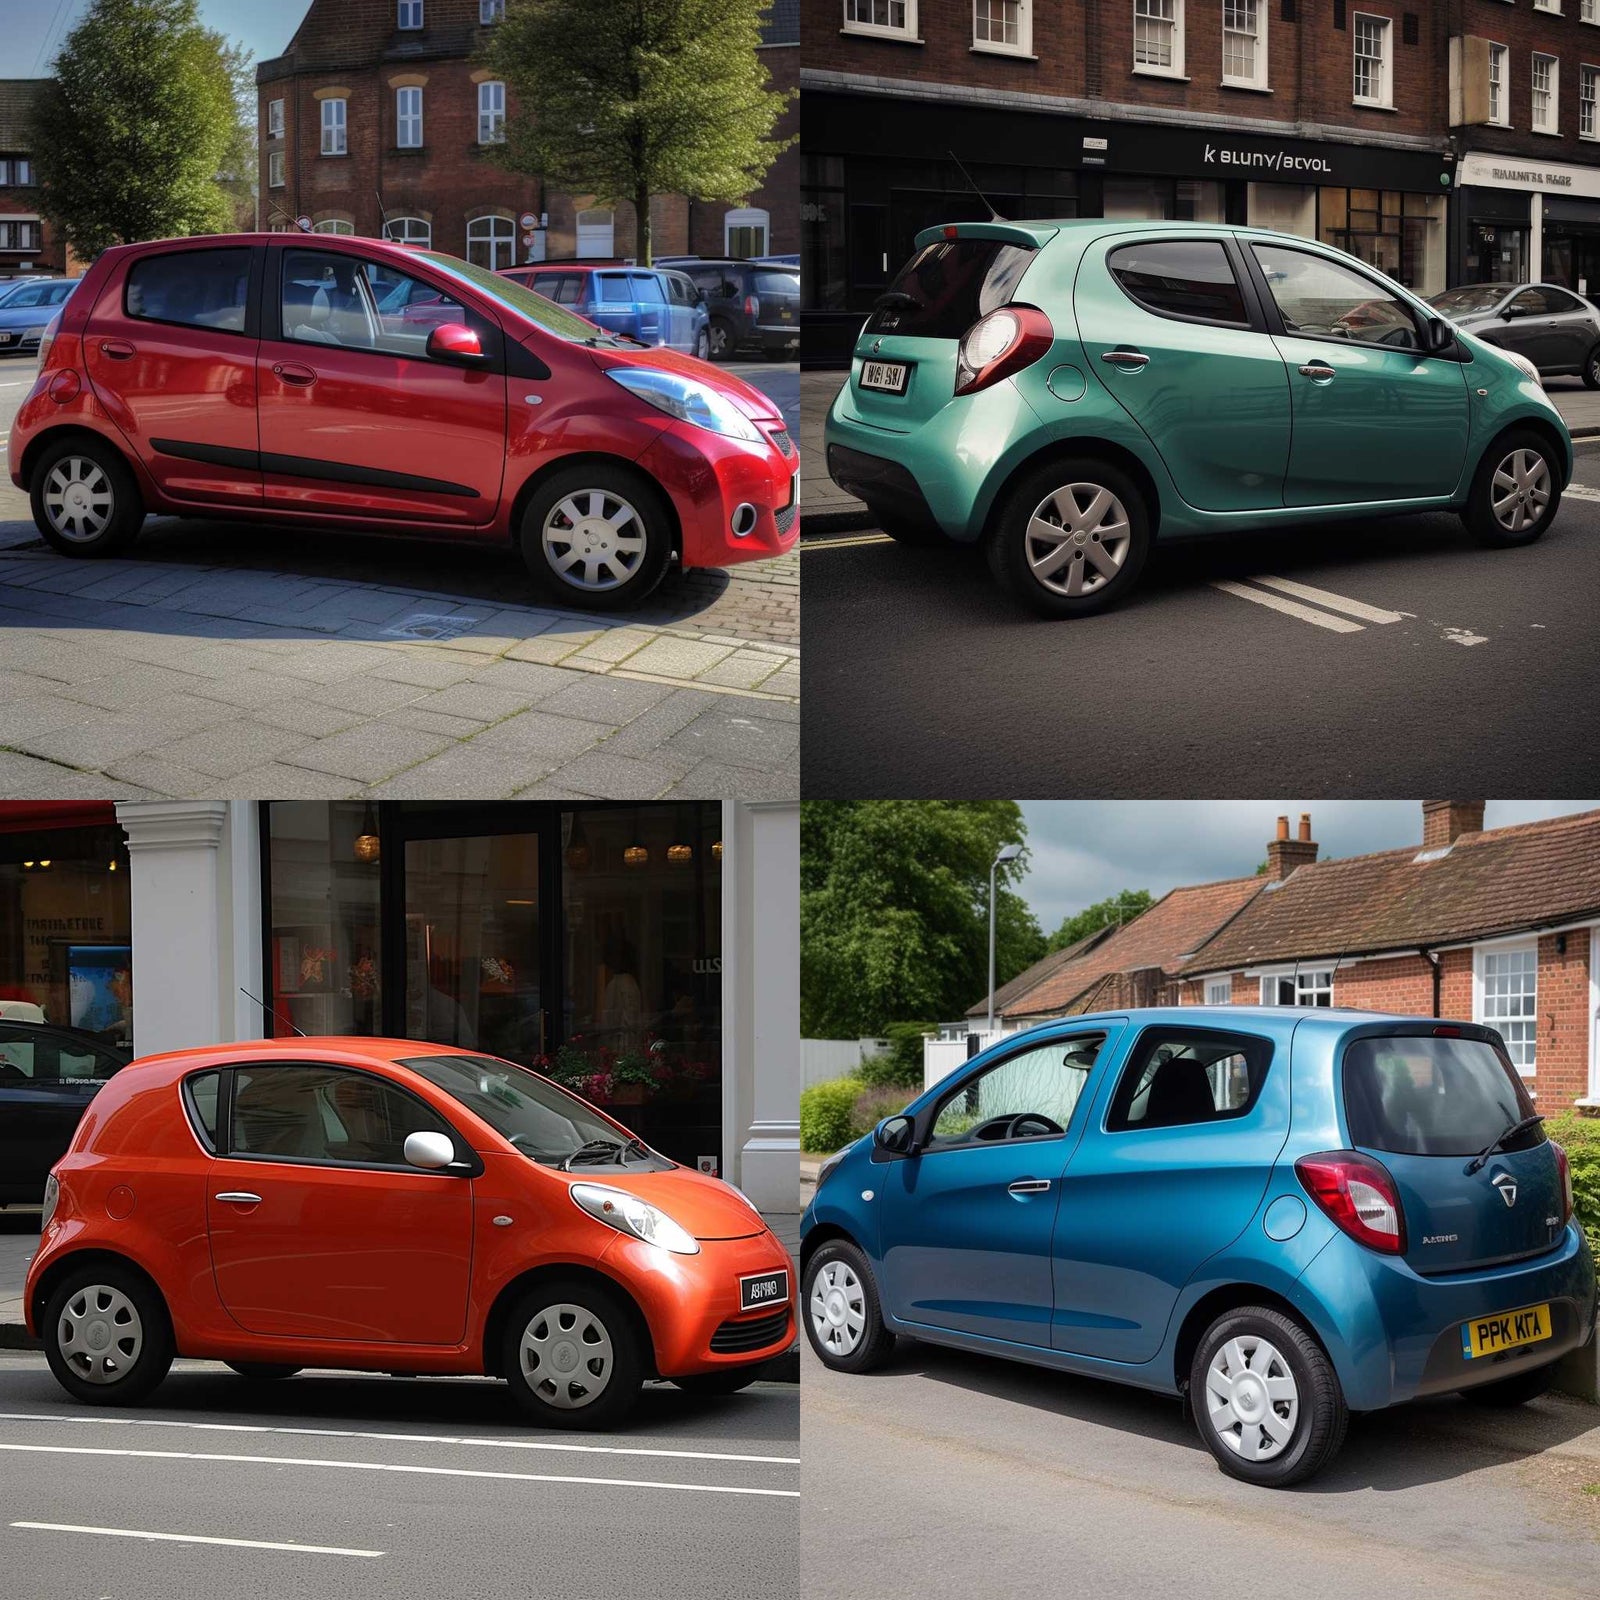 Top 5 Small UK Cars with the Largest Boots: Maximizing Boot Space on a Budget